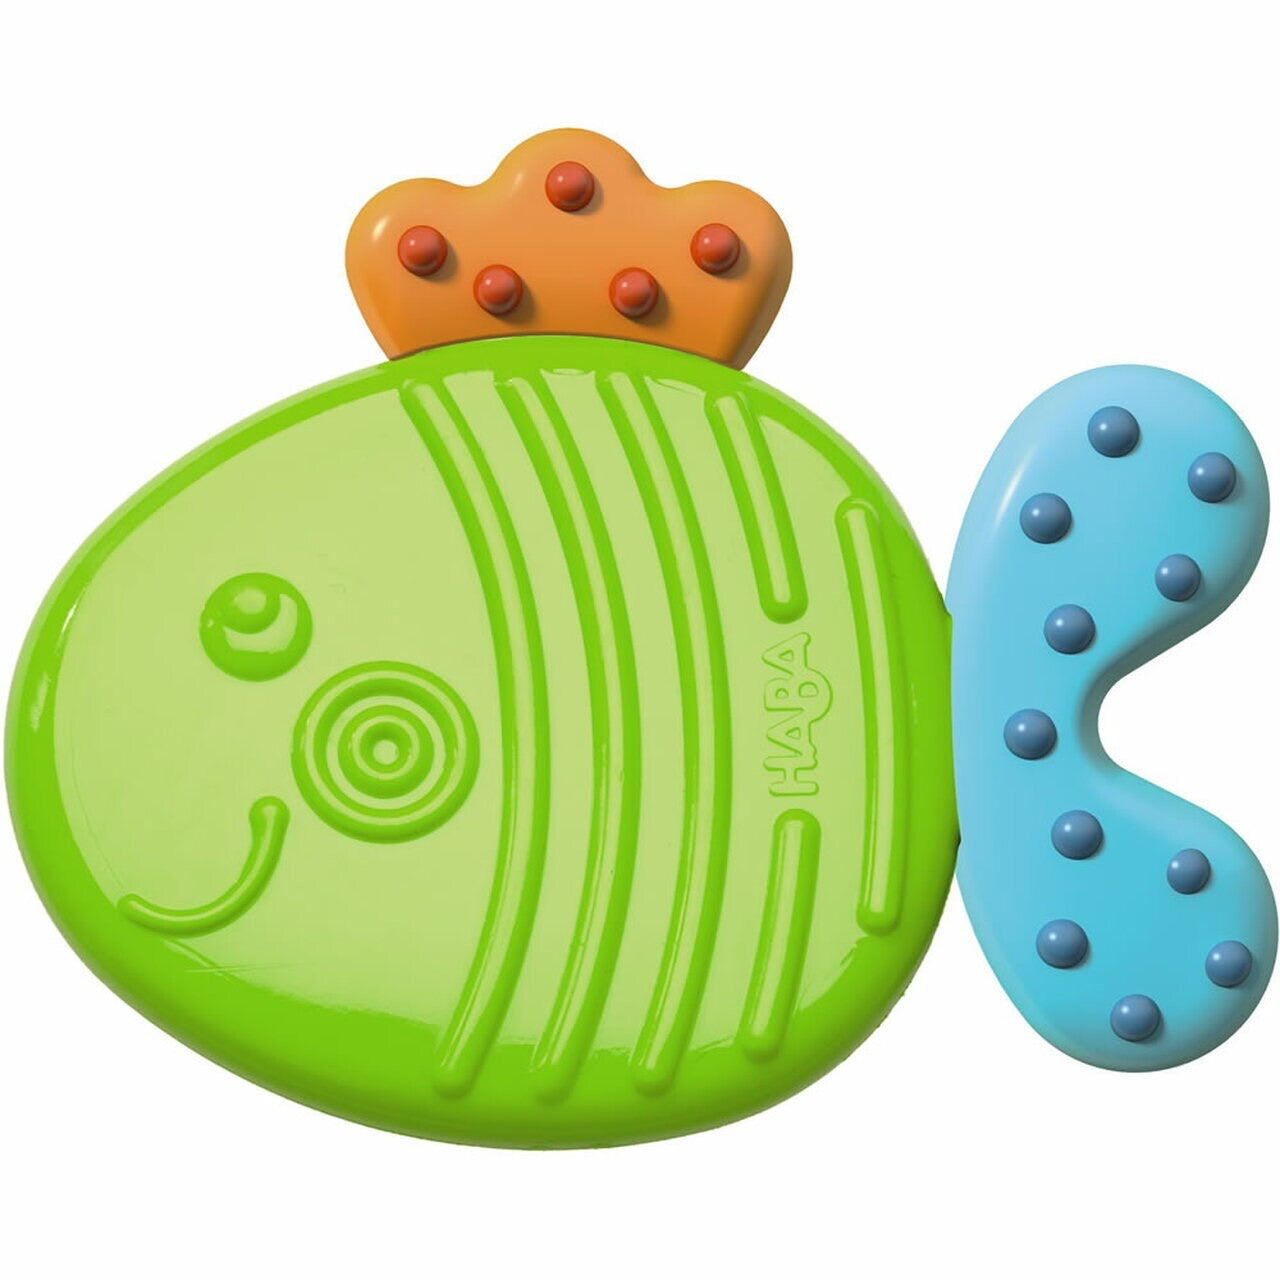 Clutching Toy Fish by Haba